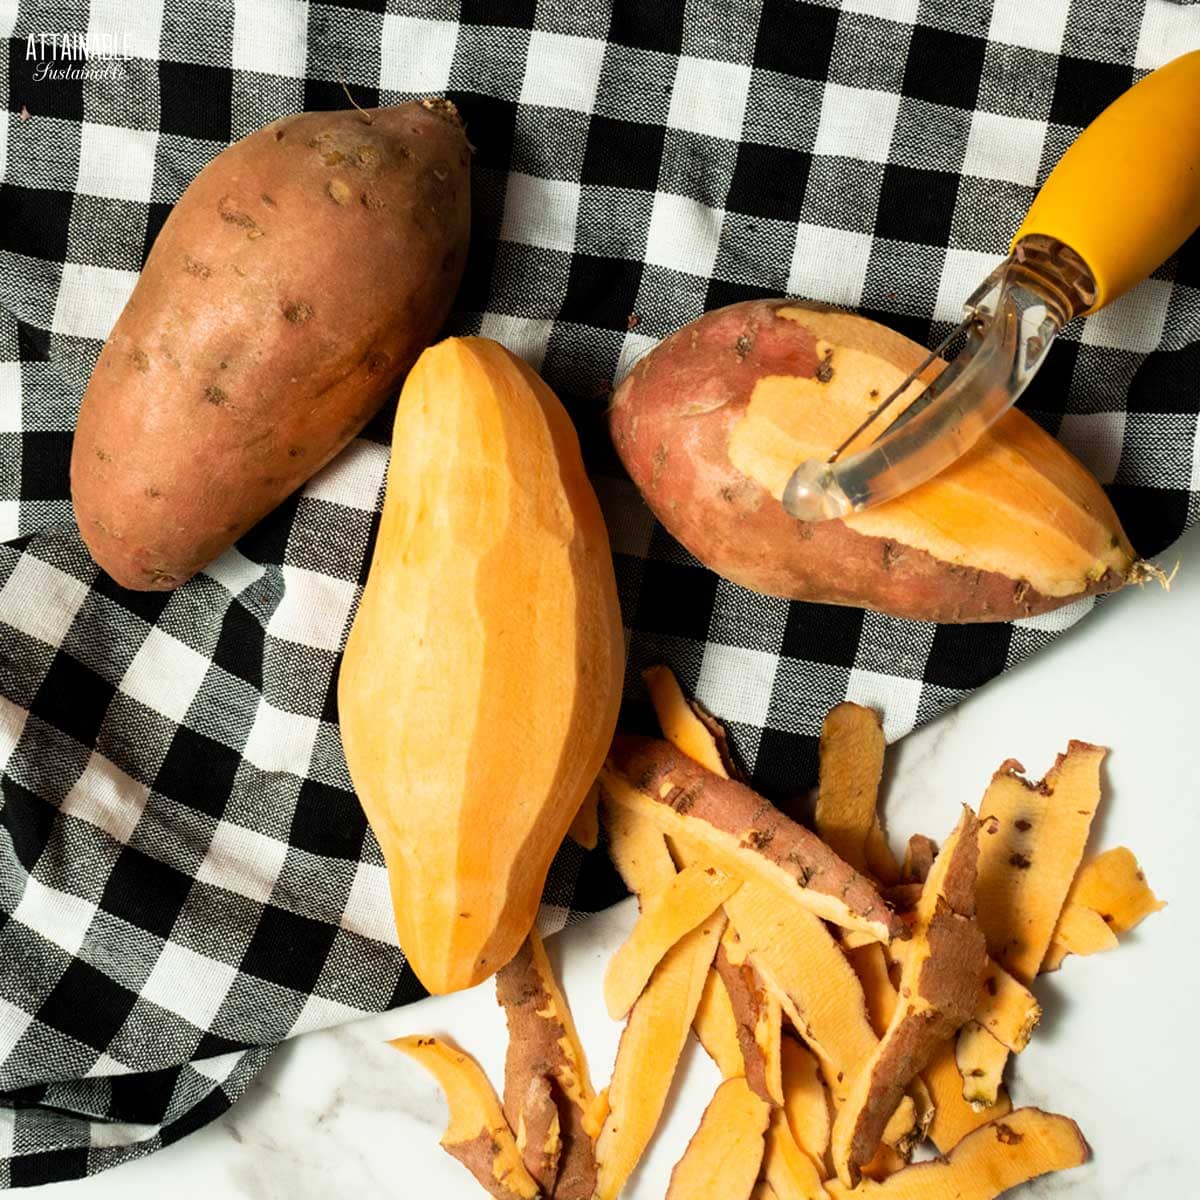 3 sweet potatoes in the process of being peeled, with the peels sititng next to them and and orange potato peeler, all on a black and white checkered cloth. 